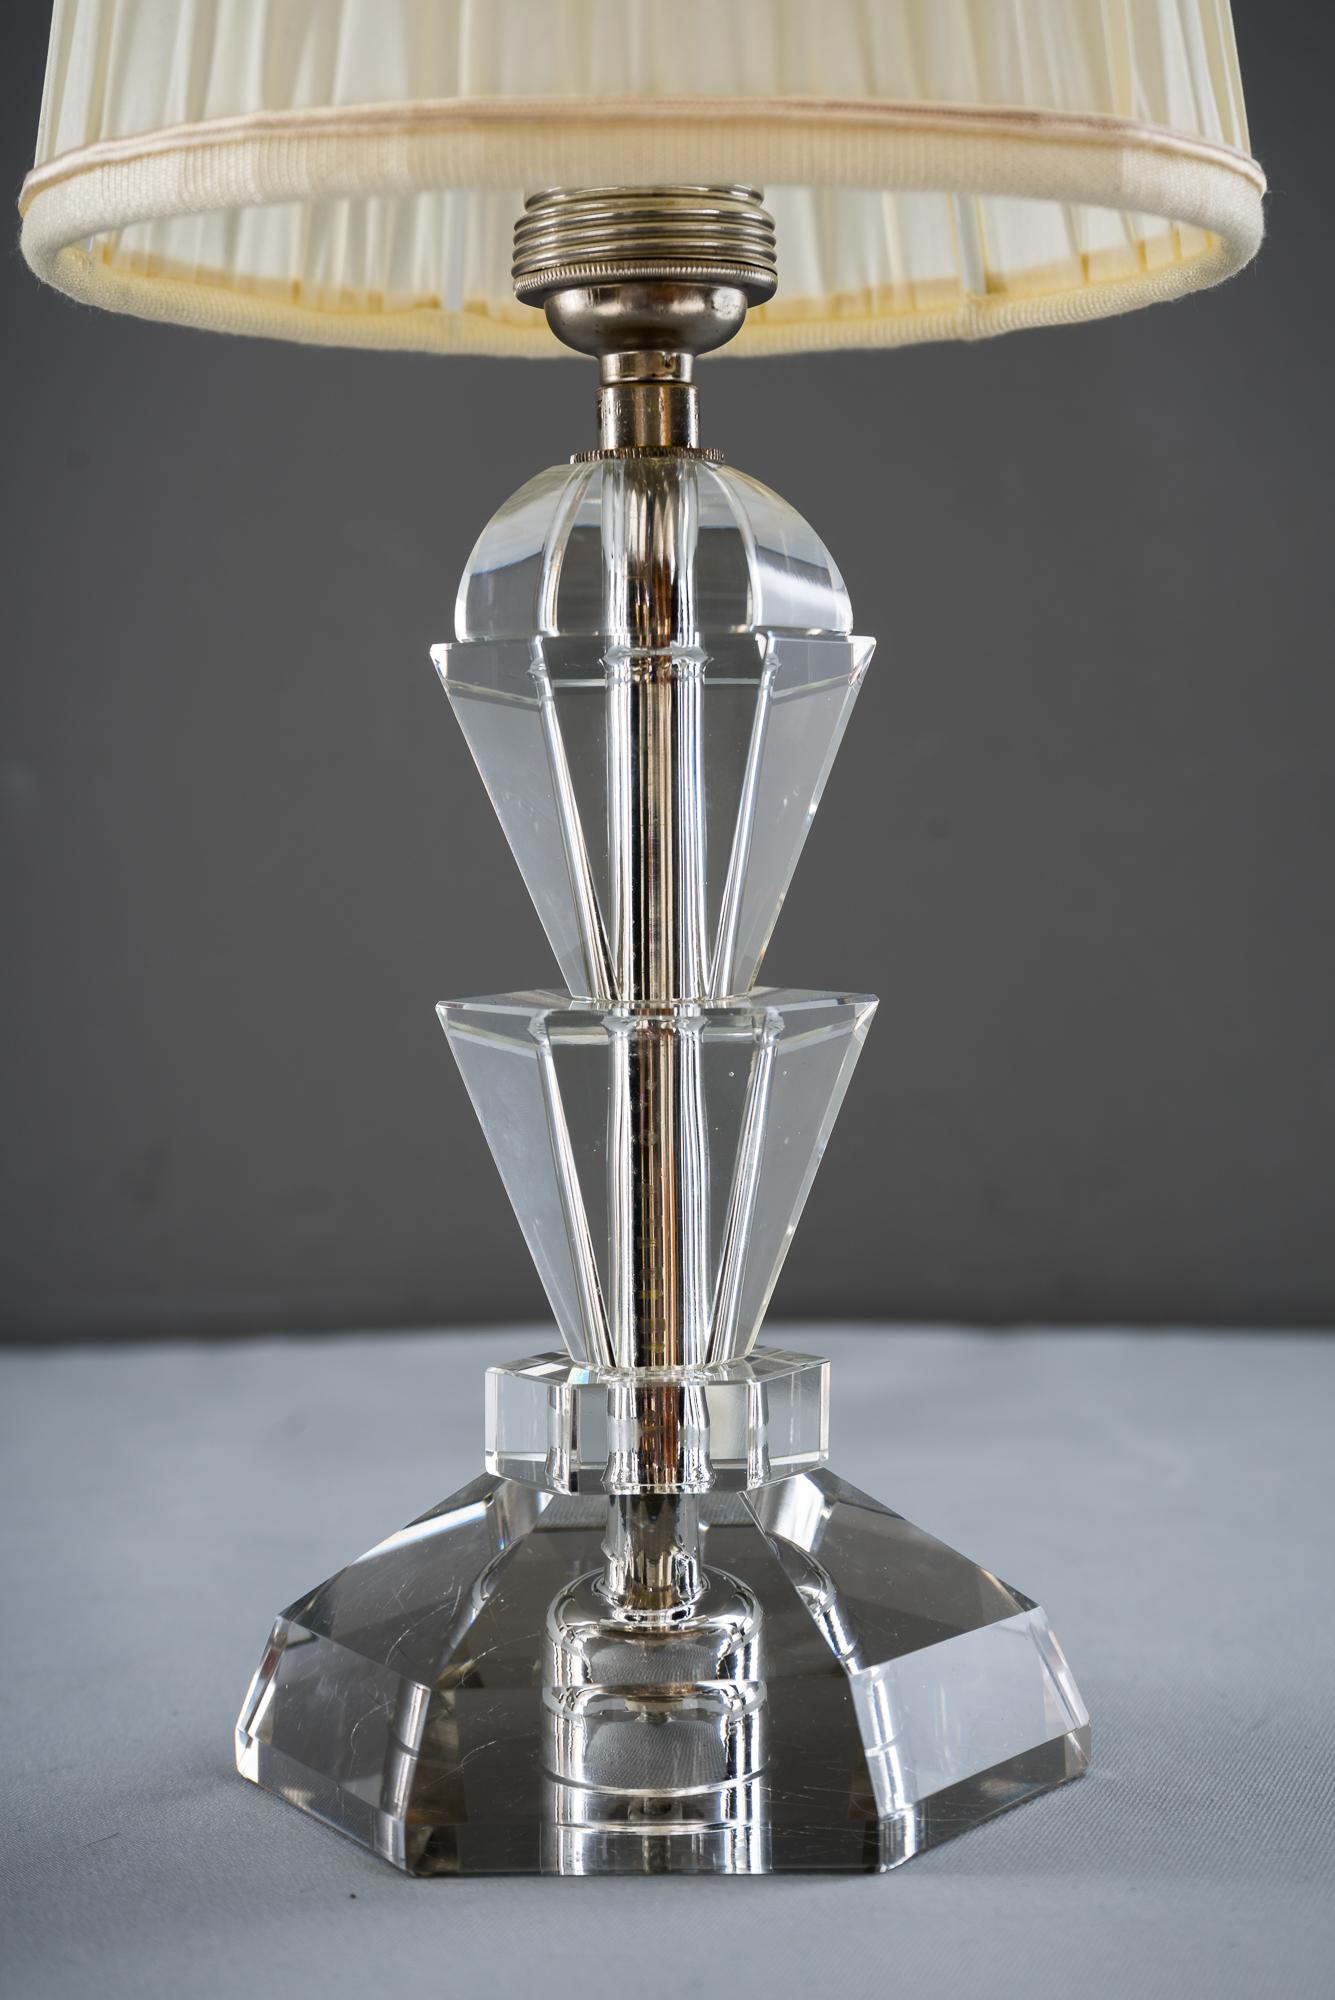 Bakalowits table lamp, circa 1950s
Glass, nickel-plated and fabric
Original condition
Fabric shade is replaced (new).